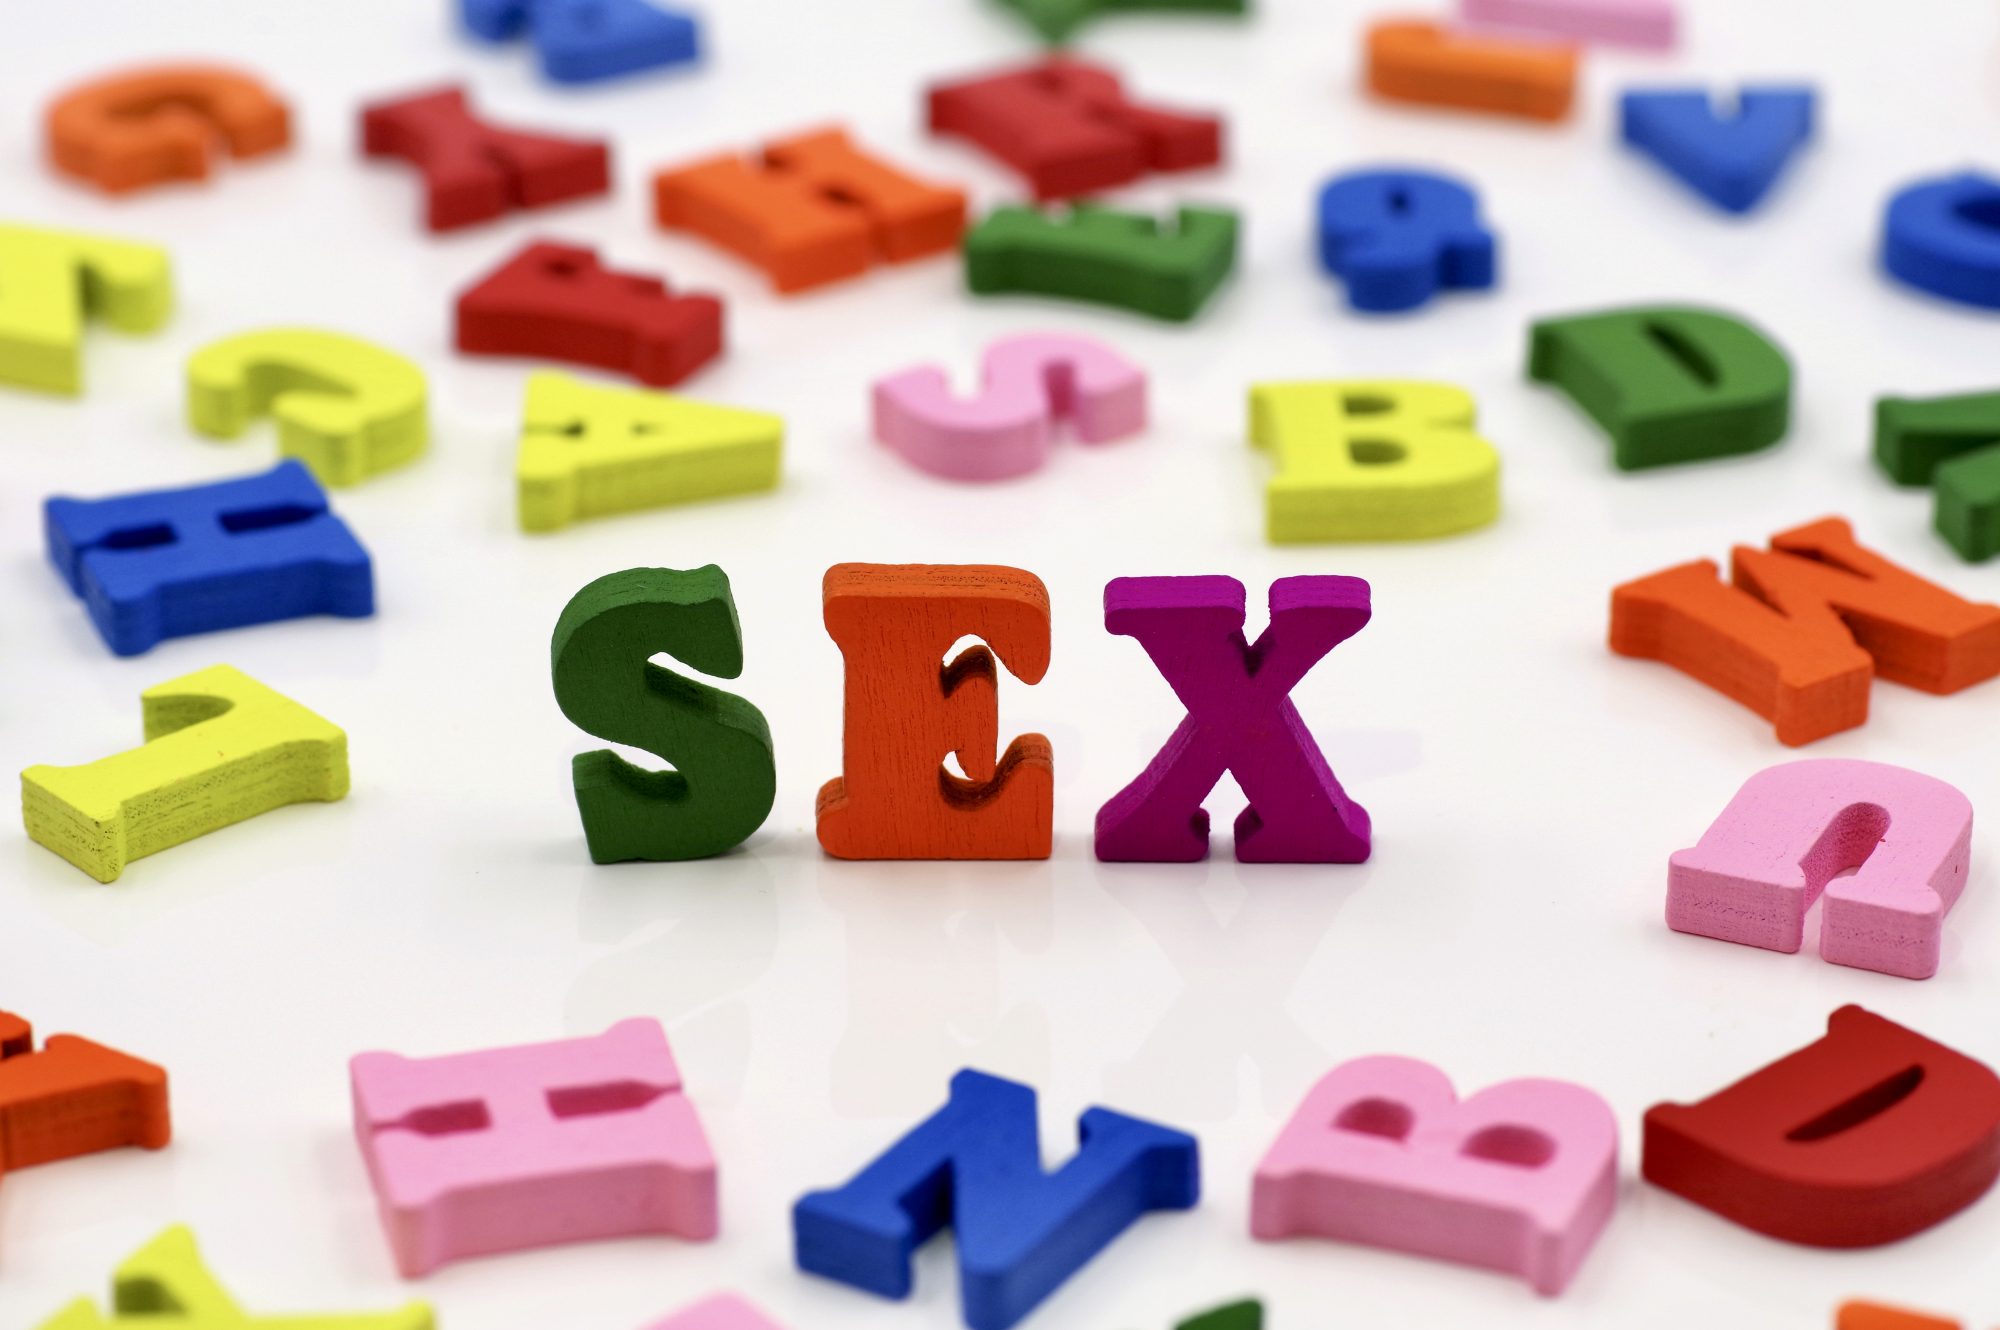 An image of wooden letters spelling out the word "sex."